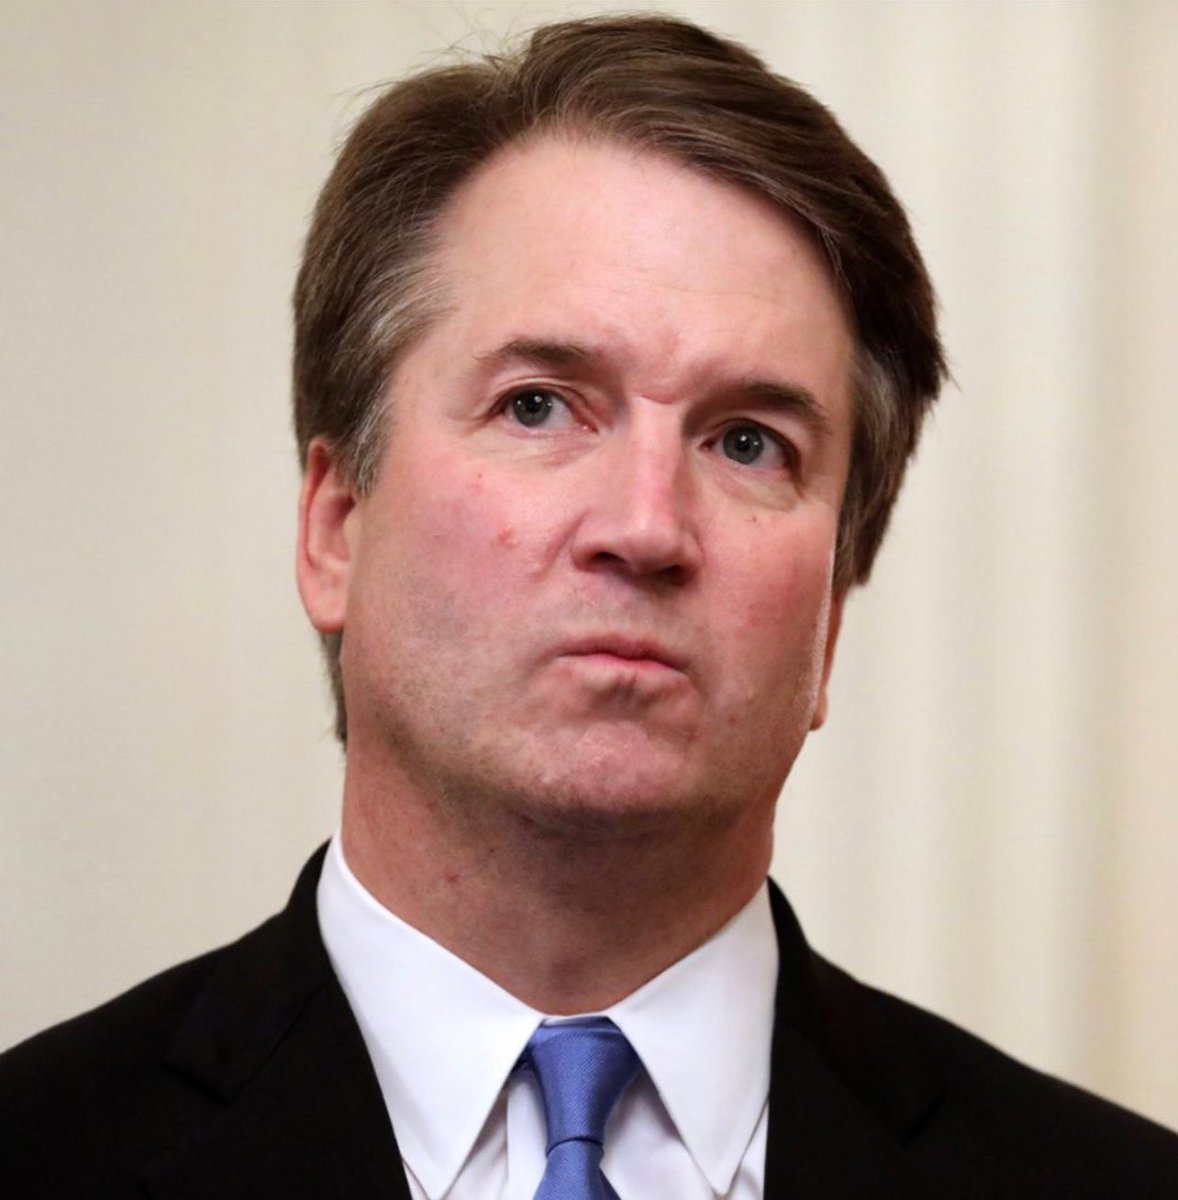 Hey Brett Kavanaugh. Want to talk about affirmative action and student loans? Let’s examine how you got into Yale, shall we? During your Senate testimony, you said “I got into Yale Law School. That’s the No. 1 law school in the country. I had no connections there. I got…